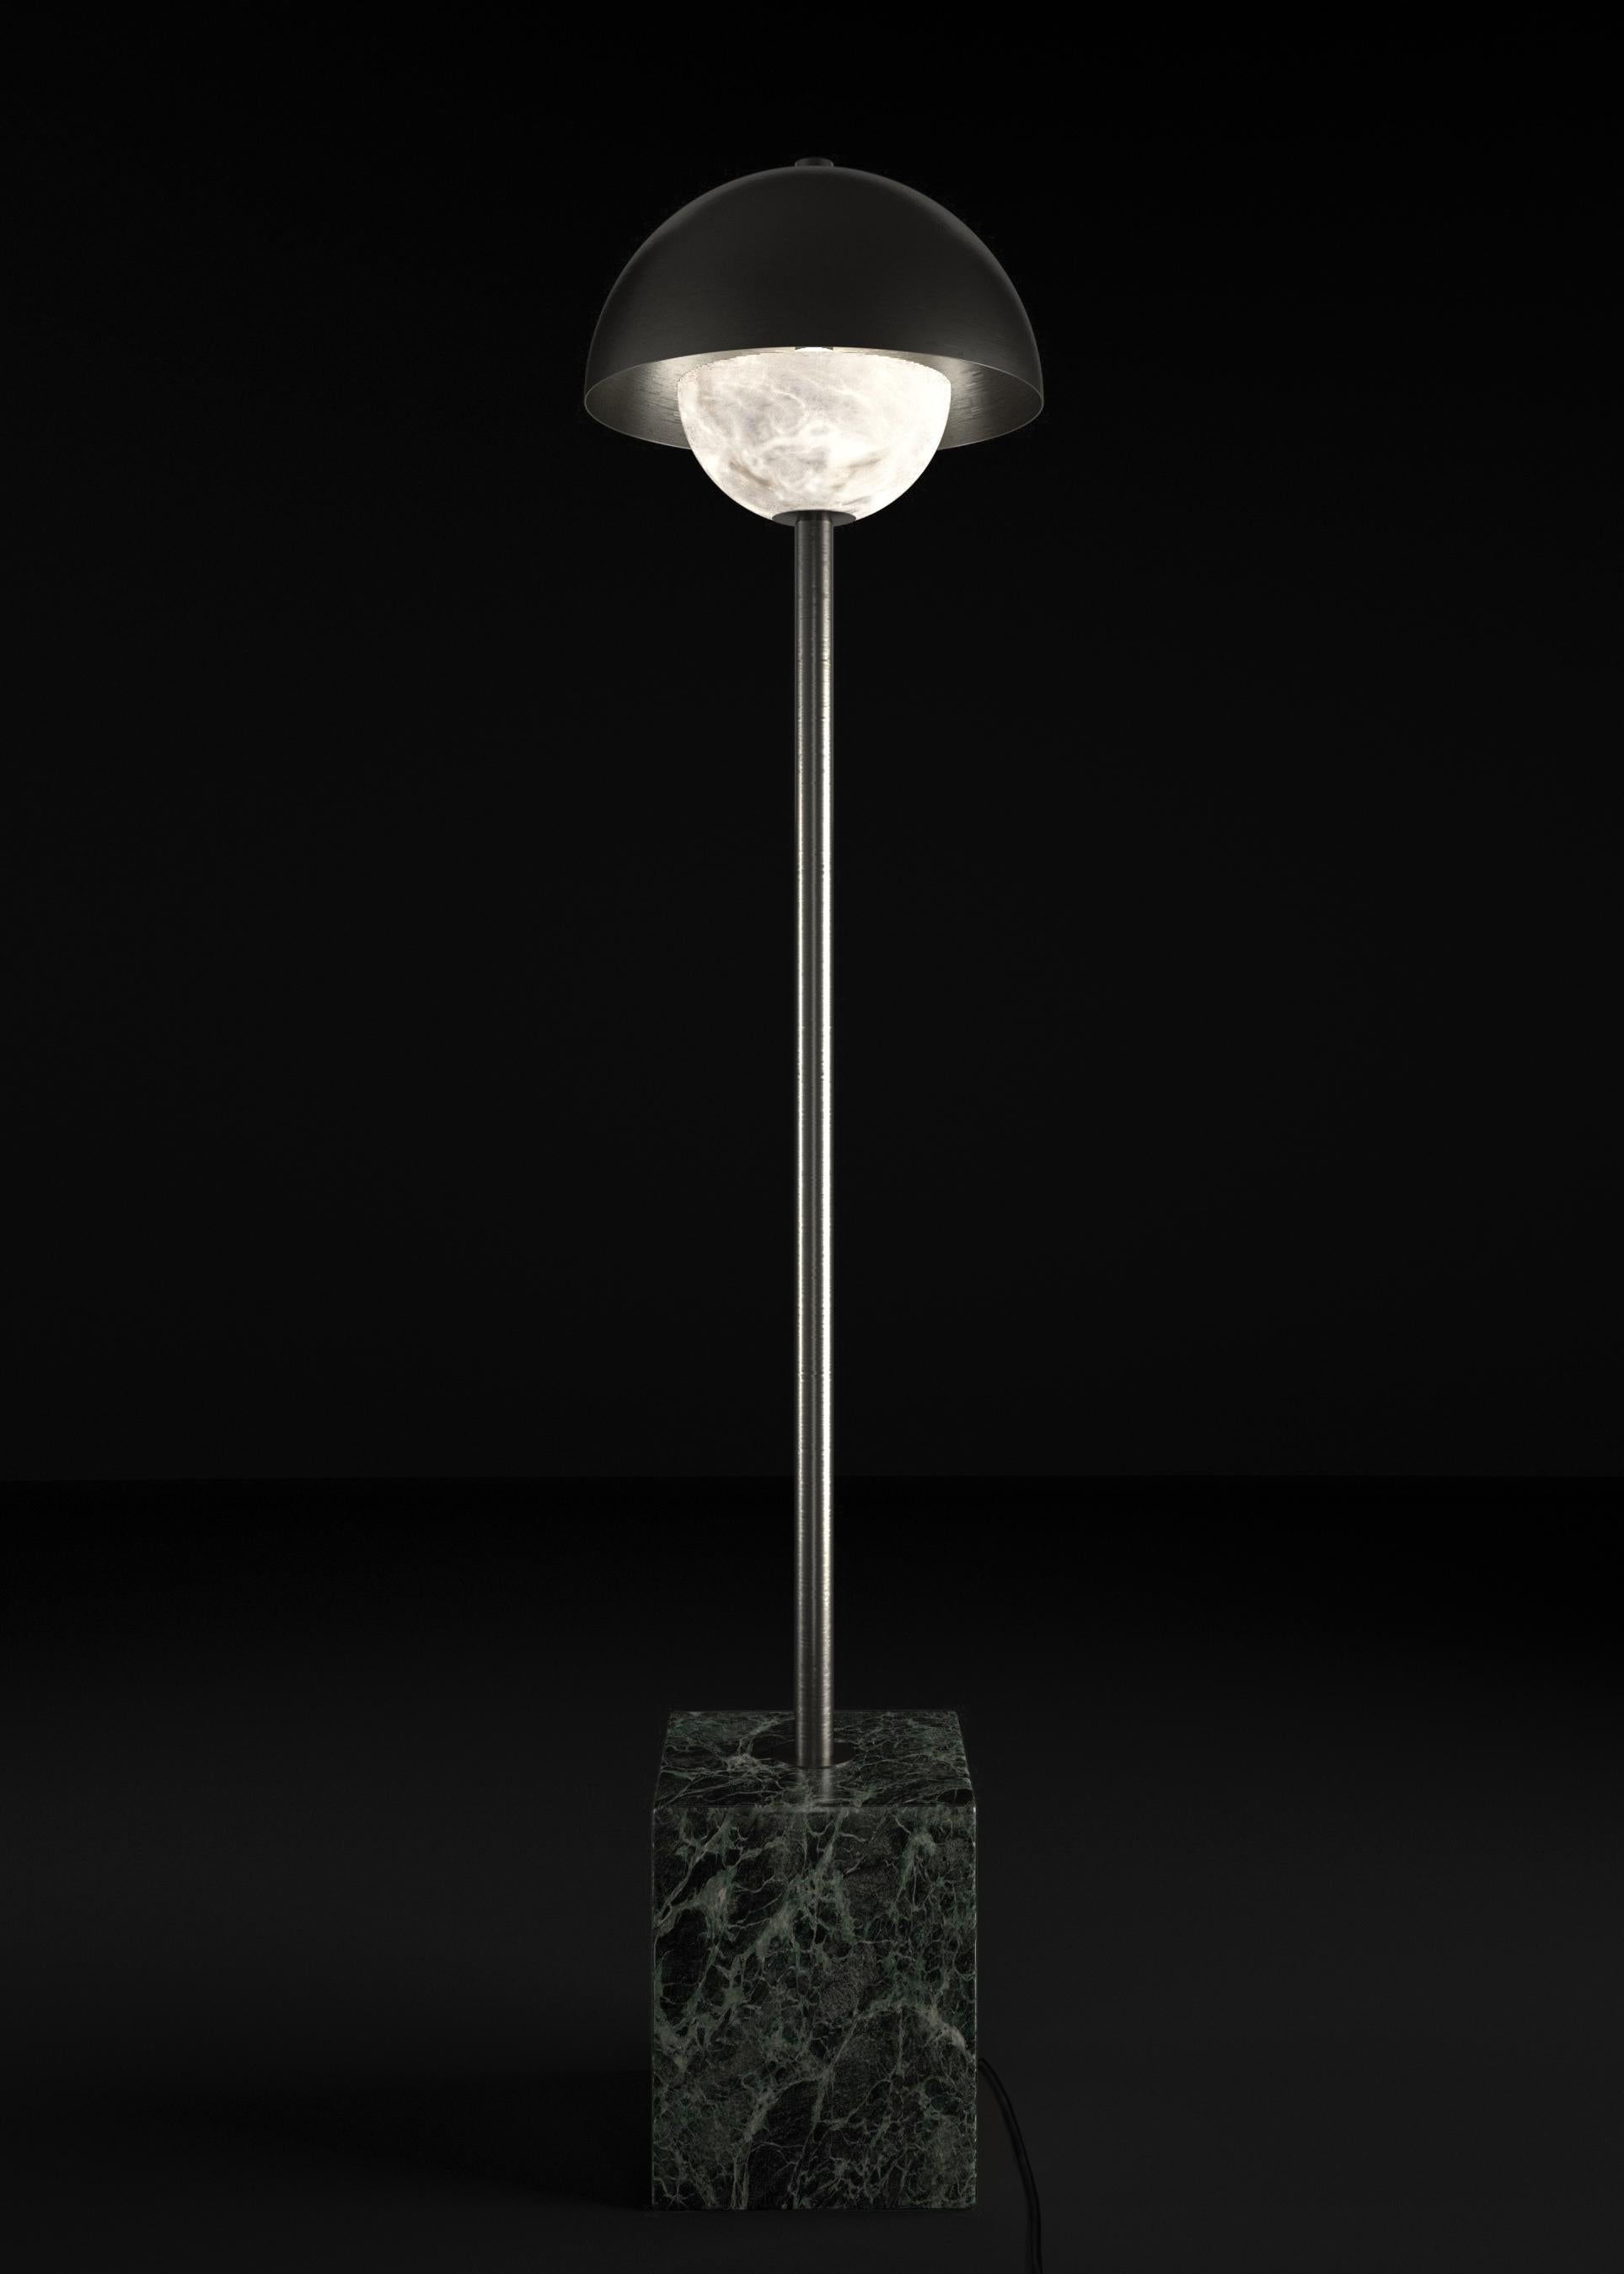 Apollo Brushed Black Metal Floor Lamp by Alabastro Italiano
Dimensions: D 30 x W 30 x H 130 cm.
Materials: White alabaster, Nero Marquinia marble, black silk cables and metal.

Available in different finishes: Shiny Silver, Bronze, Brushed Brass,